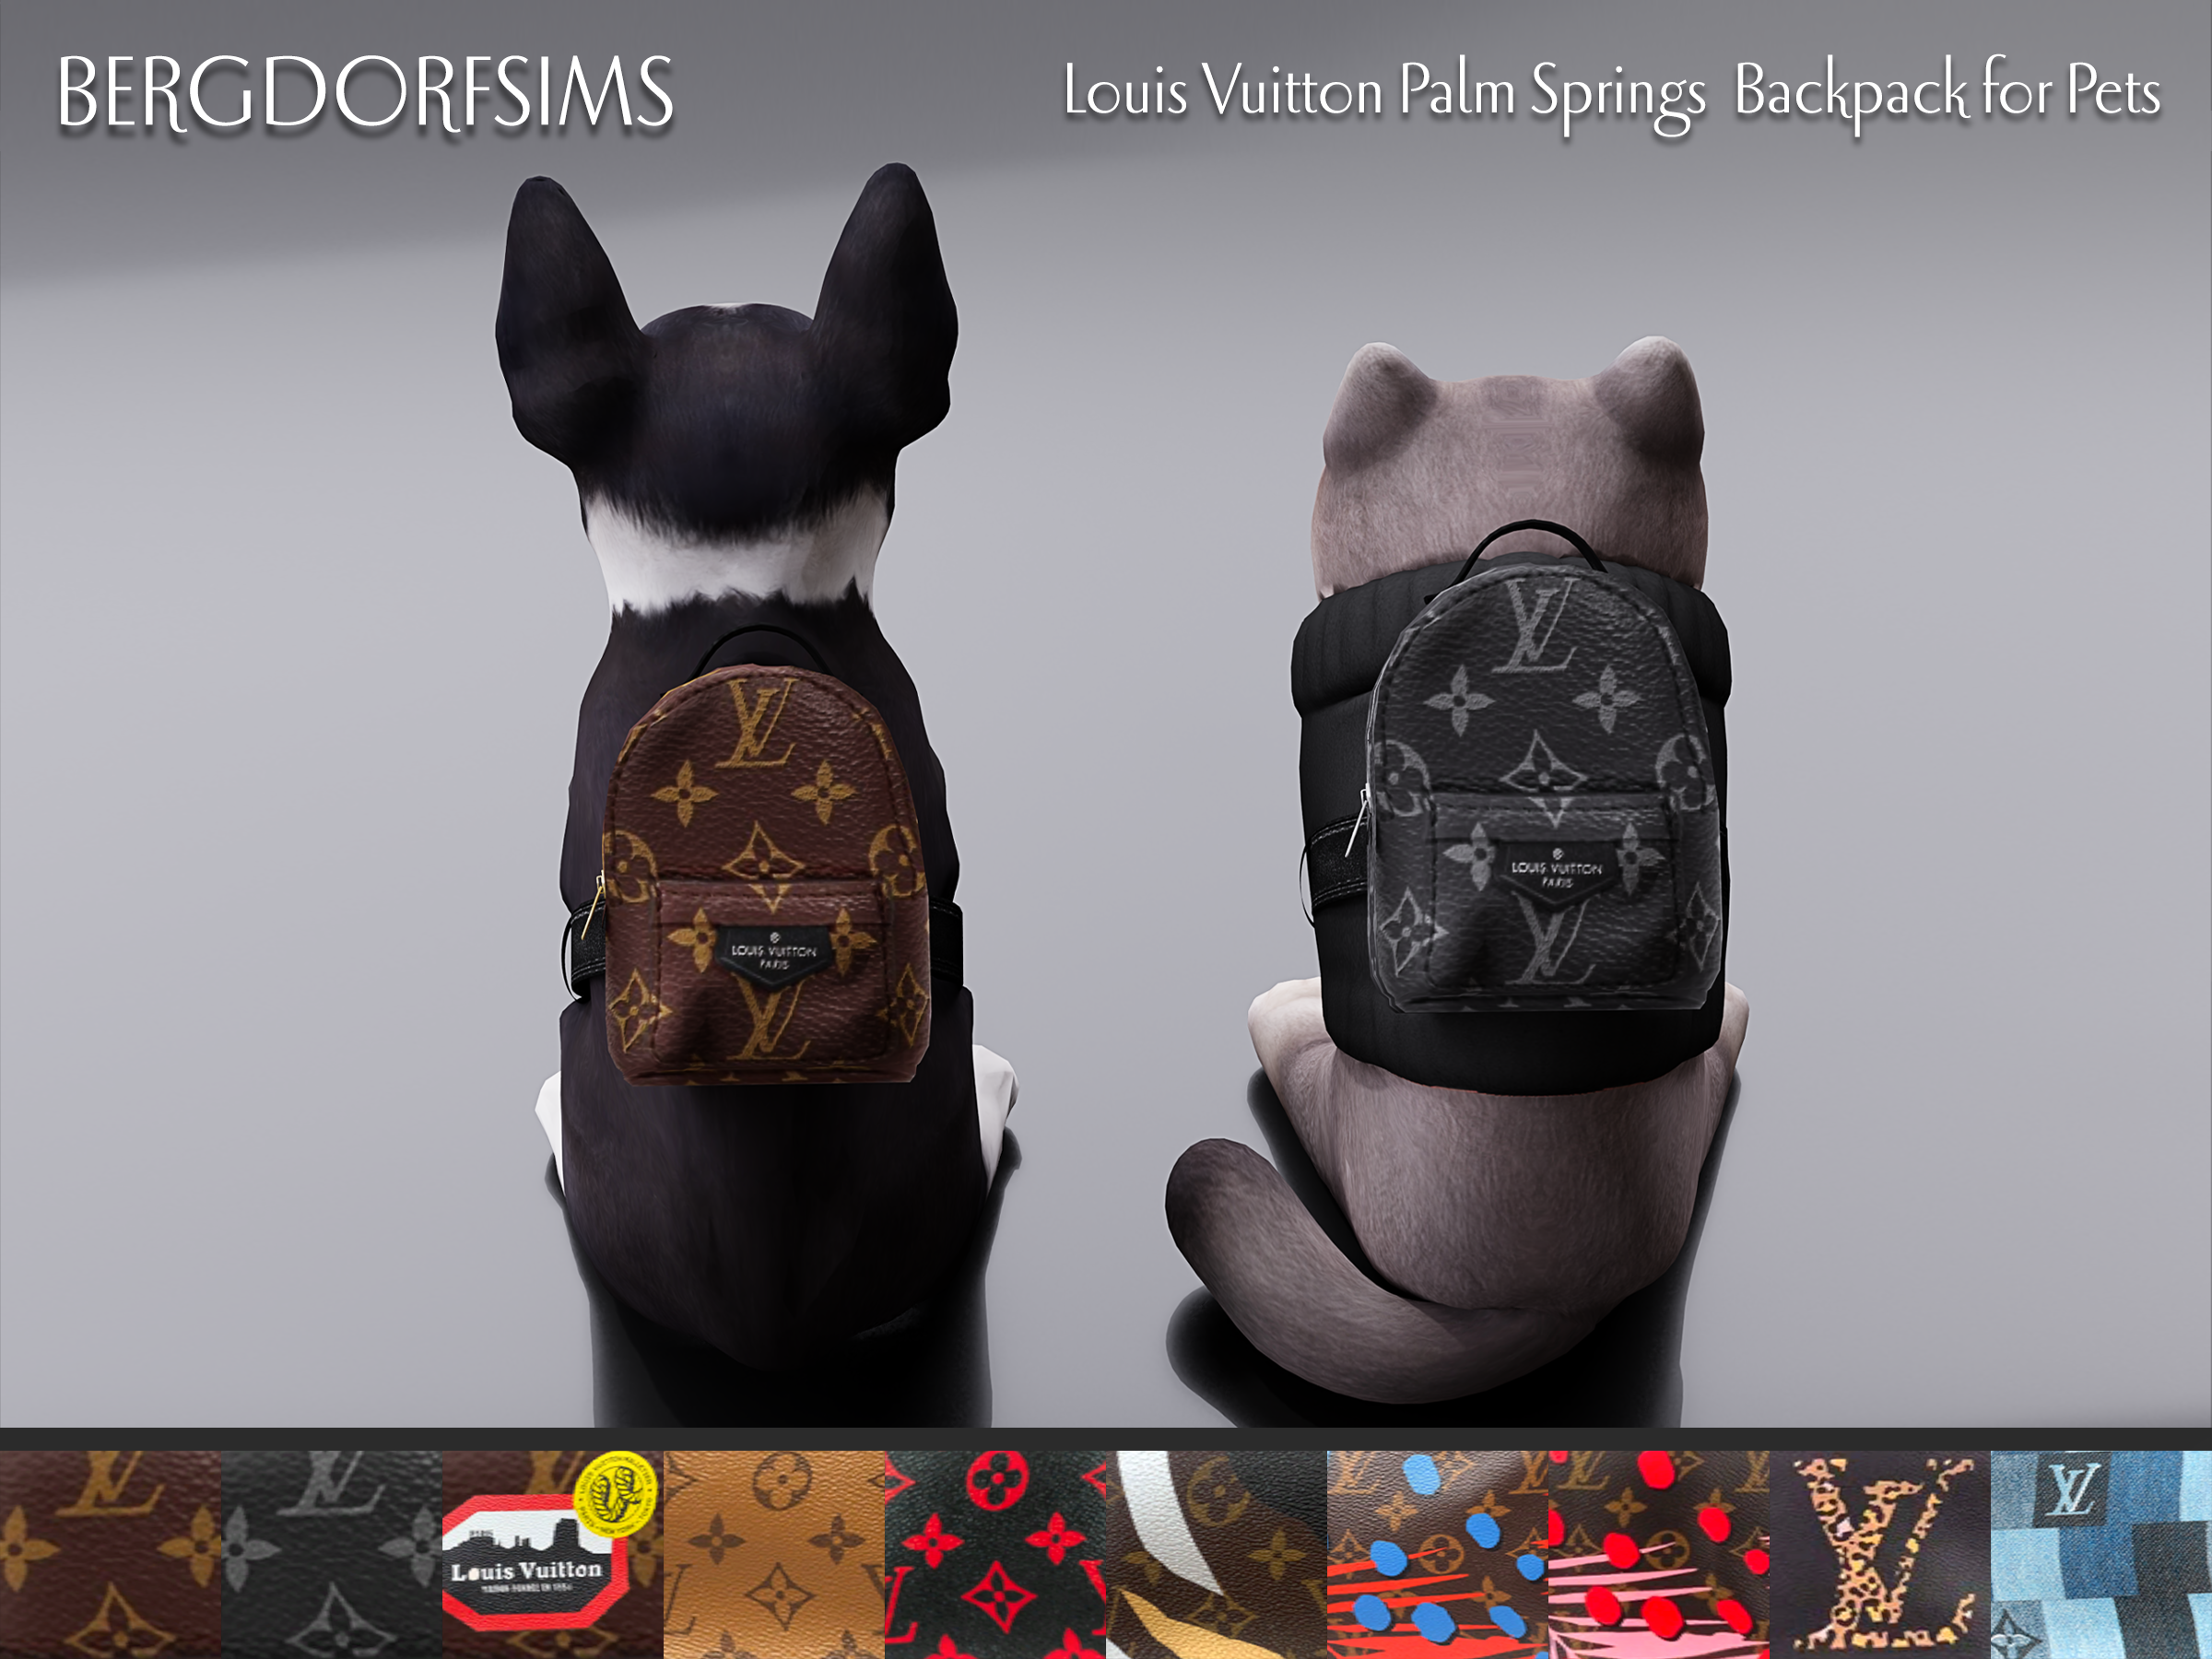 Louis Vuitton Palm Springs Backpack for Pets by bergdorfsims from Patreon